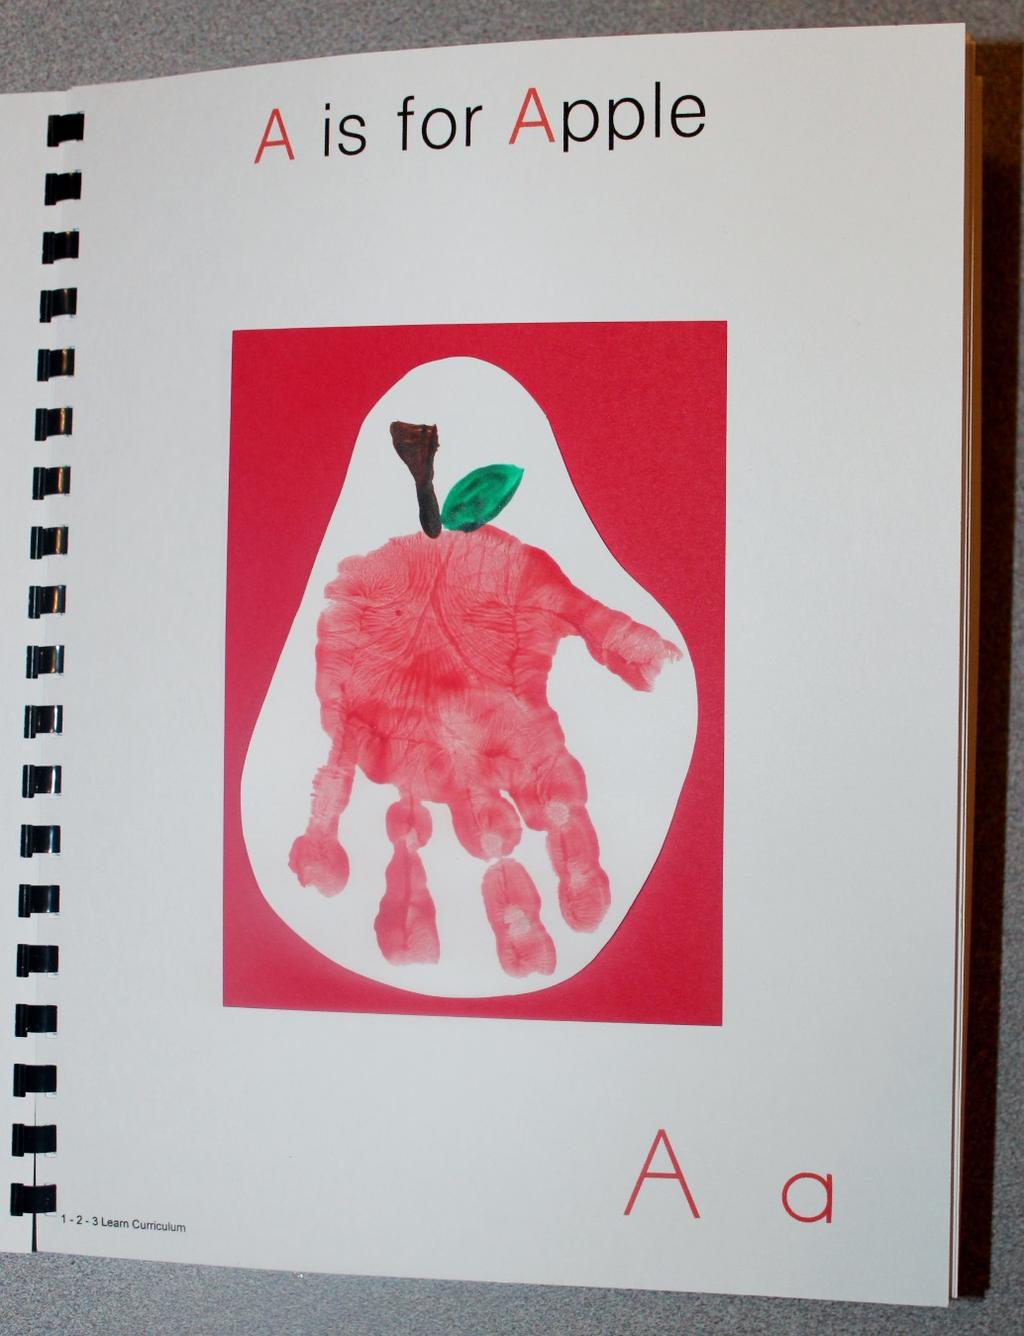 A is for Apple Paint the palm of the child s hand red and place on white card stock. When dry, paint a brown stem and green leaf.